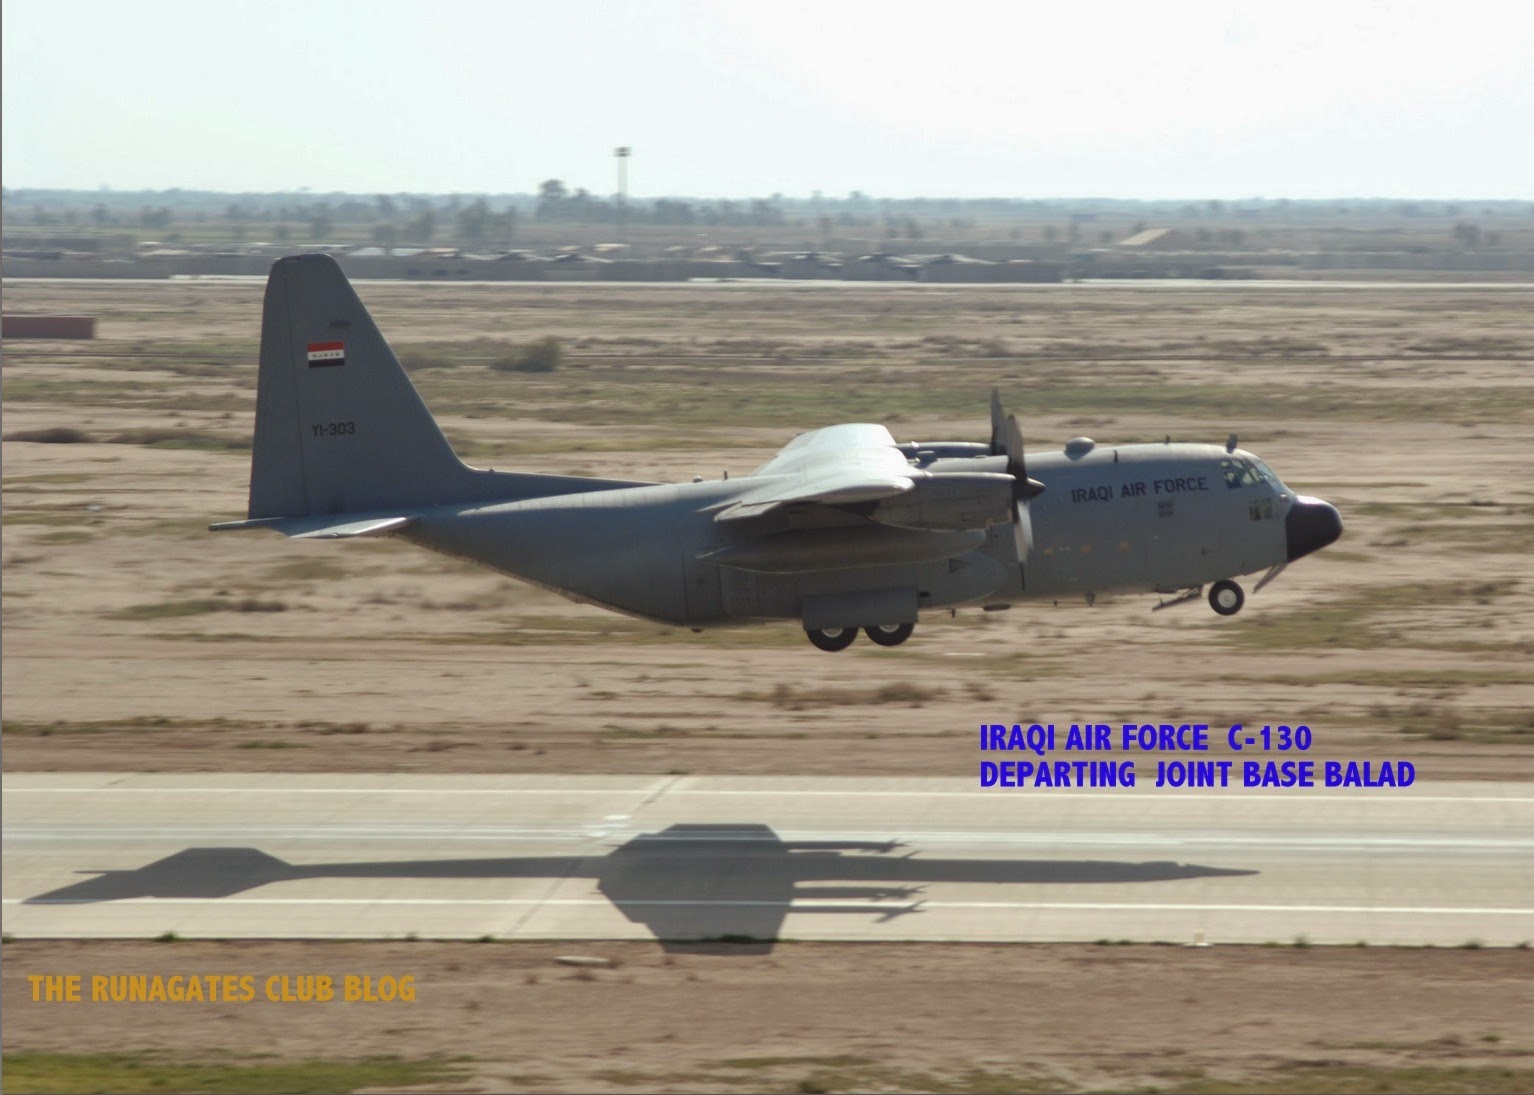 Iraqi Air Force C-130 transport photographed departing Joint Base Balad